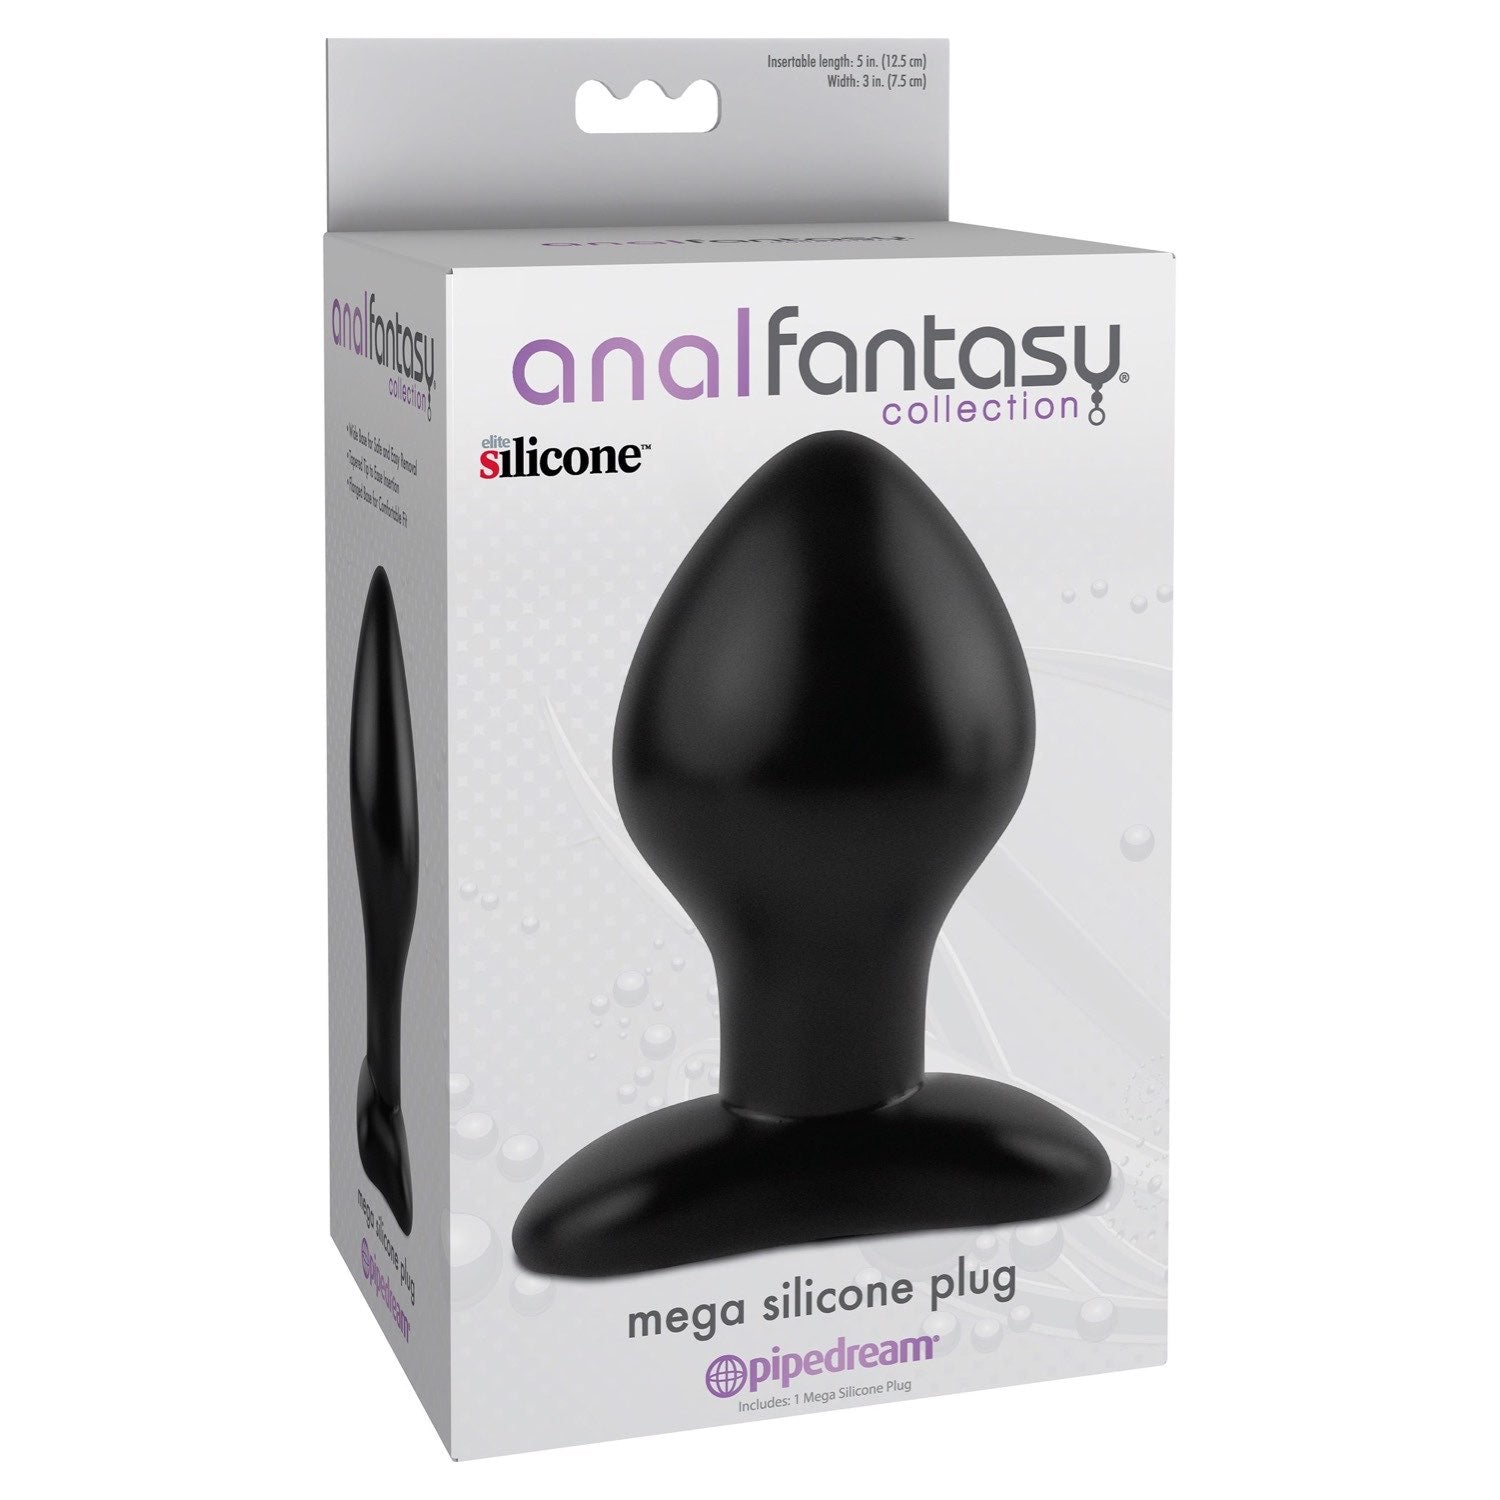 Anal Fantasy Collection Mega Silicone Plug - Black 12.5 cm (5&quot;) Butt Plug by Pipedream